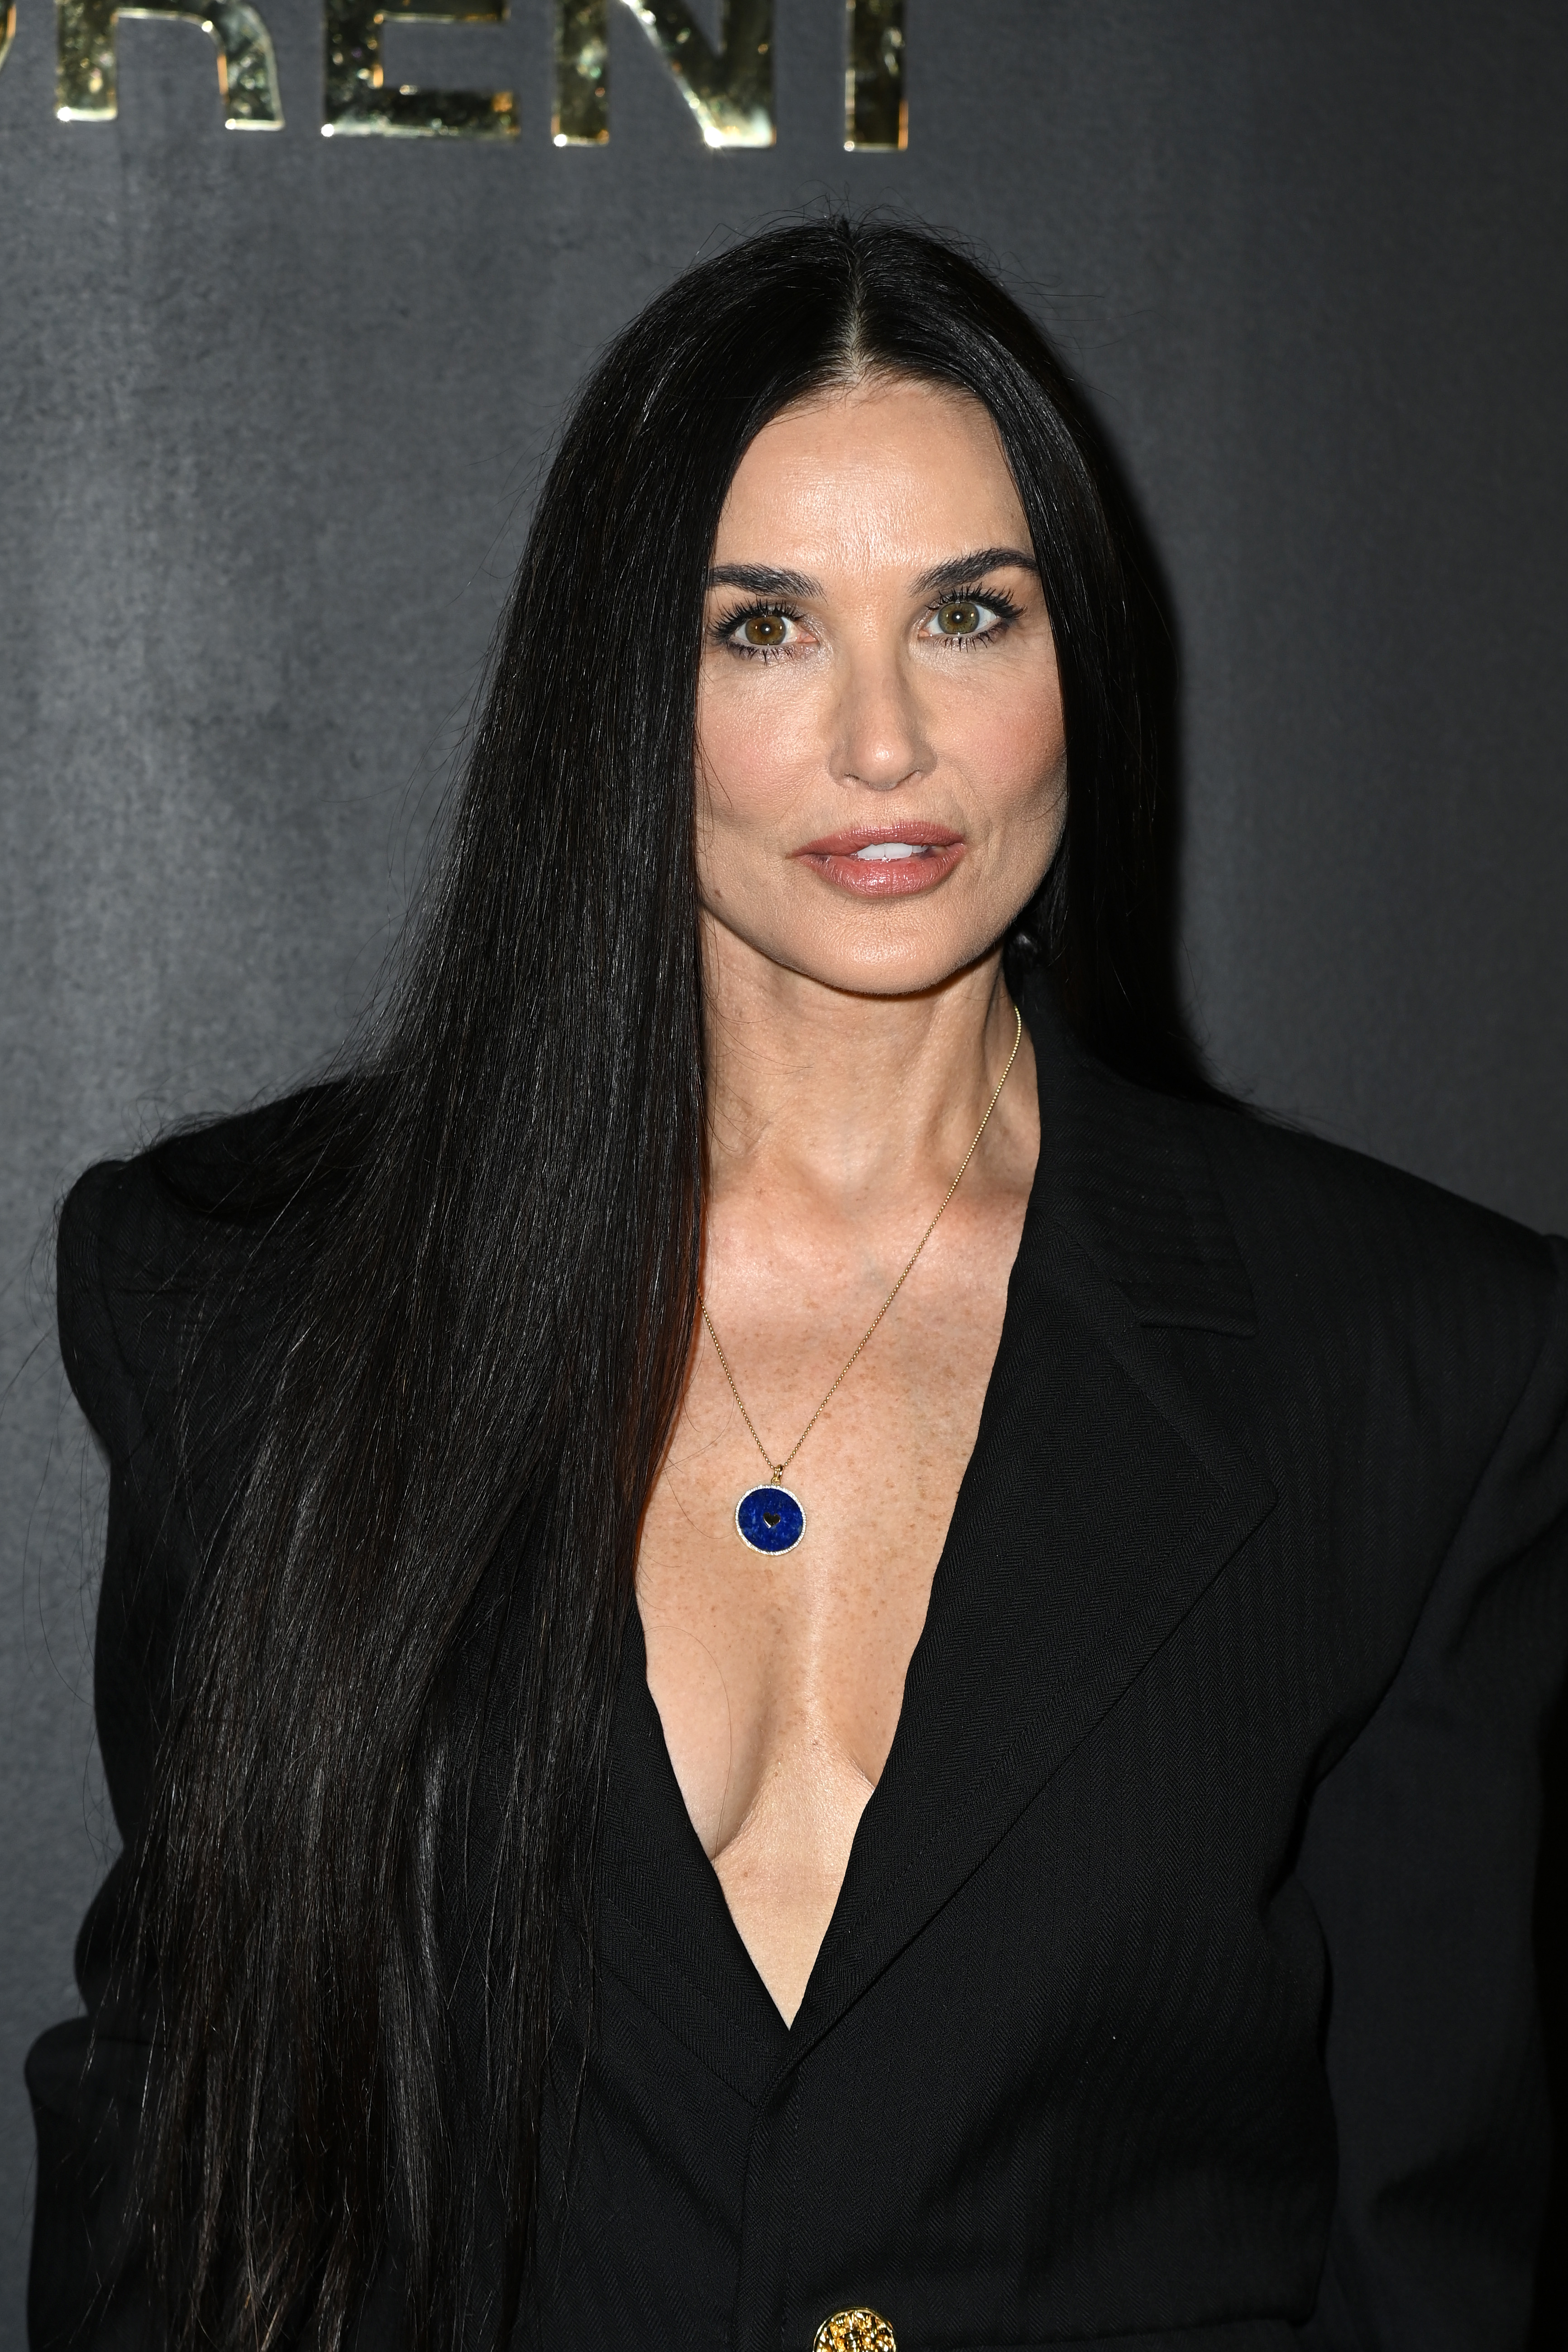 Demi Moore during the Saint-Laurent Womenswear Fall/Winter 2022/2023 show on March 1, 2022 in Paris, France. | Source: Getty Images